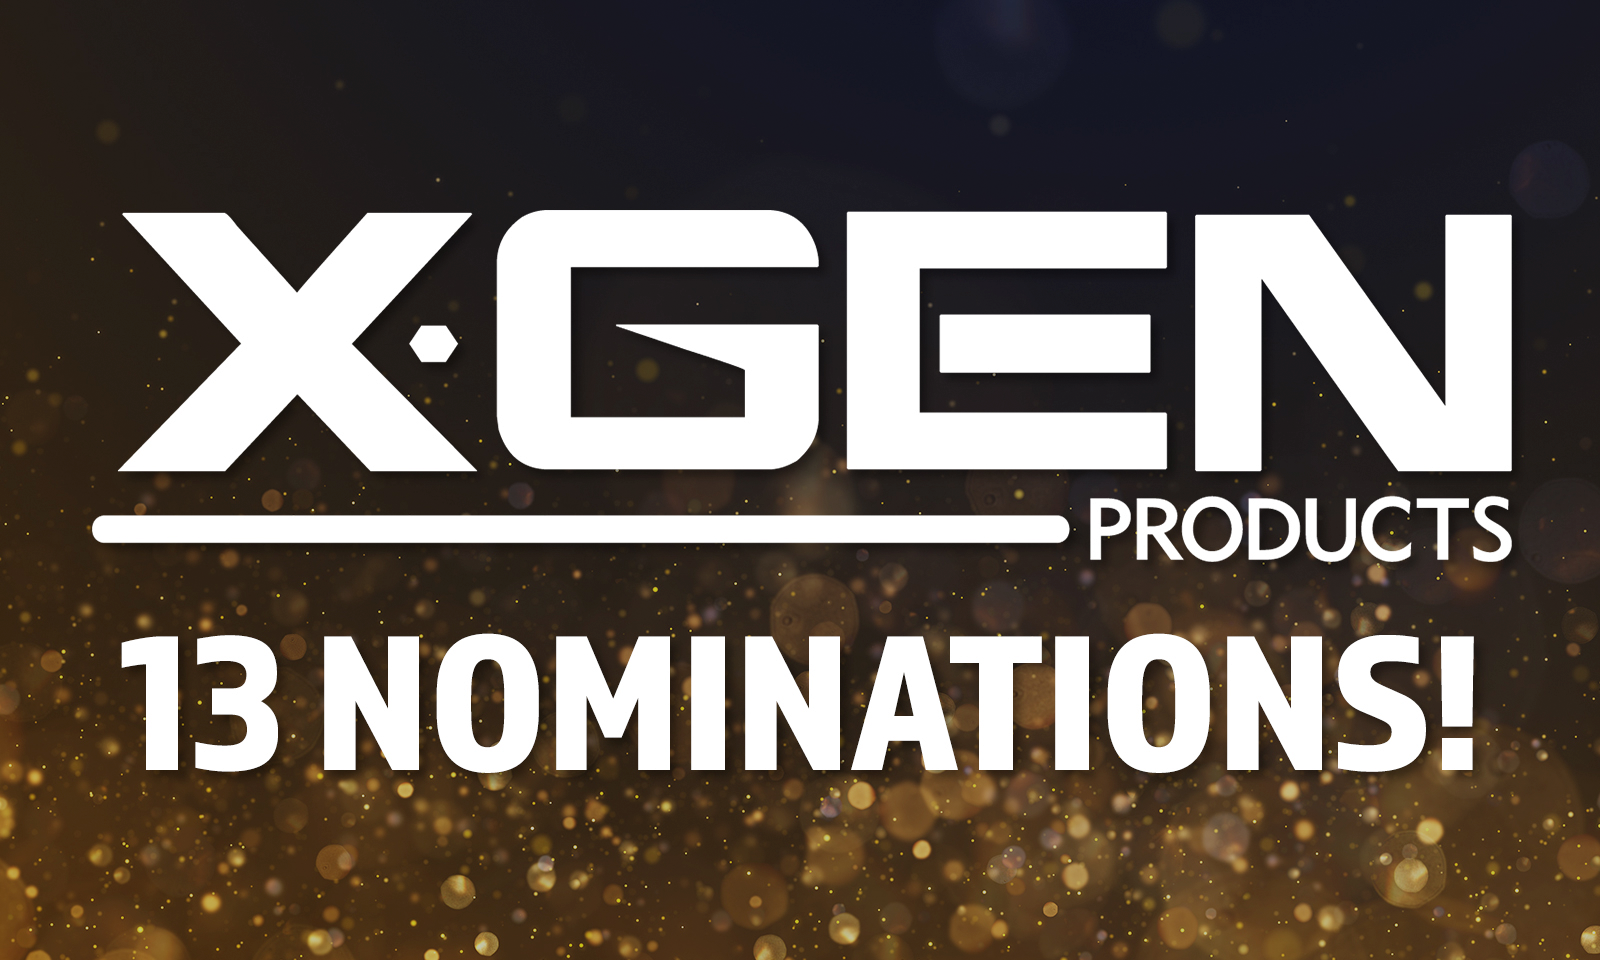 Xgen Products Tallies 13 Noms for AVN Awards, ‘O’ Awards